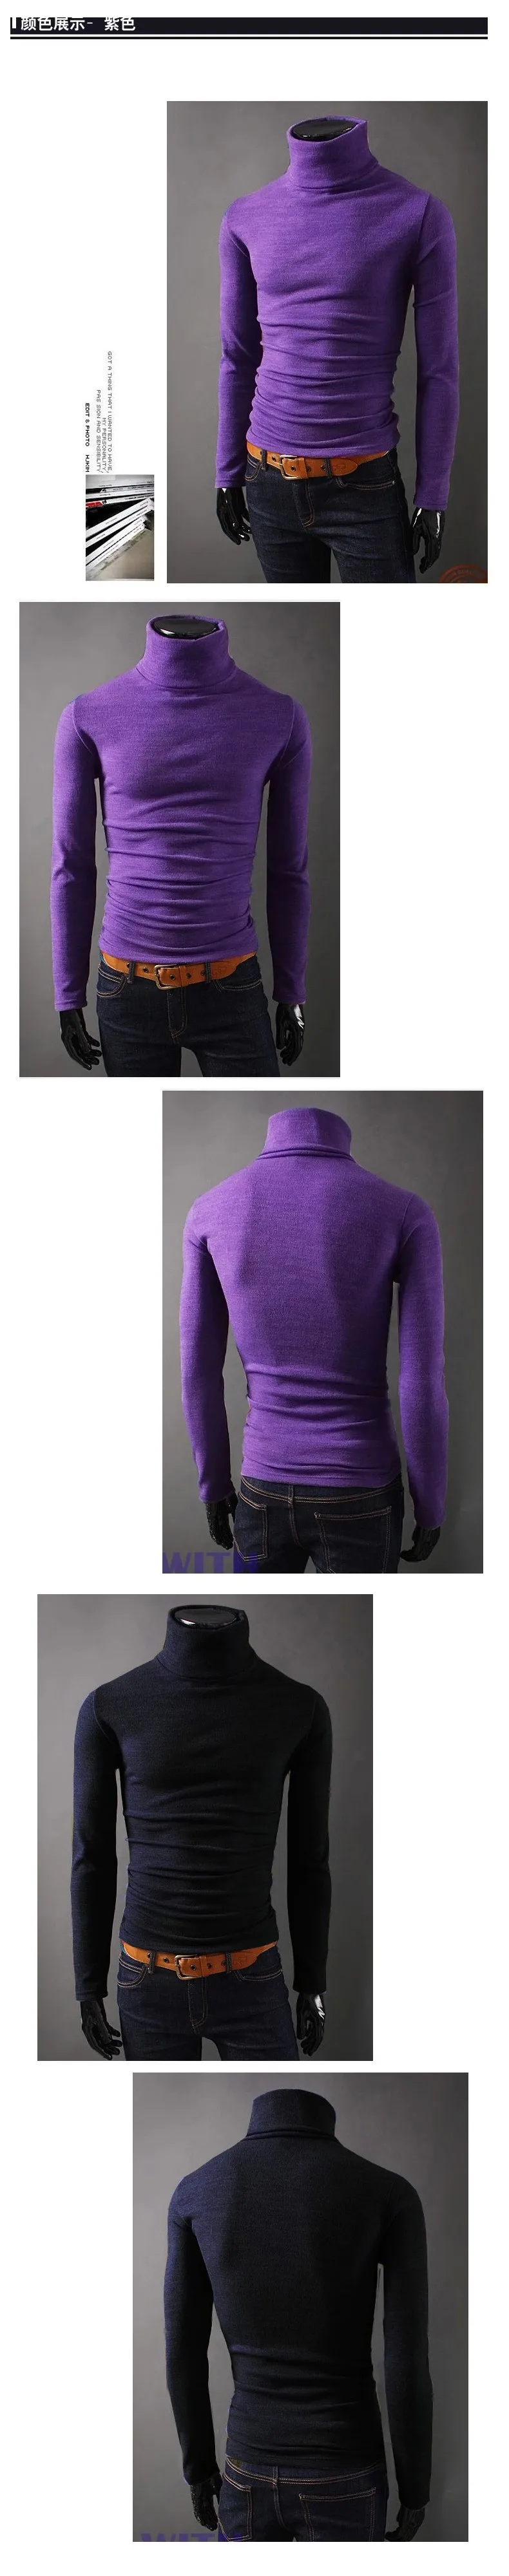 Men Winter Solid Turtleneck Sweater Male Autumn high collar Pullovers Thin and Soft Casual sweater Size 2XL 15